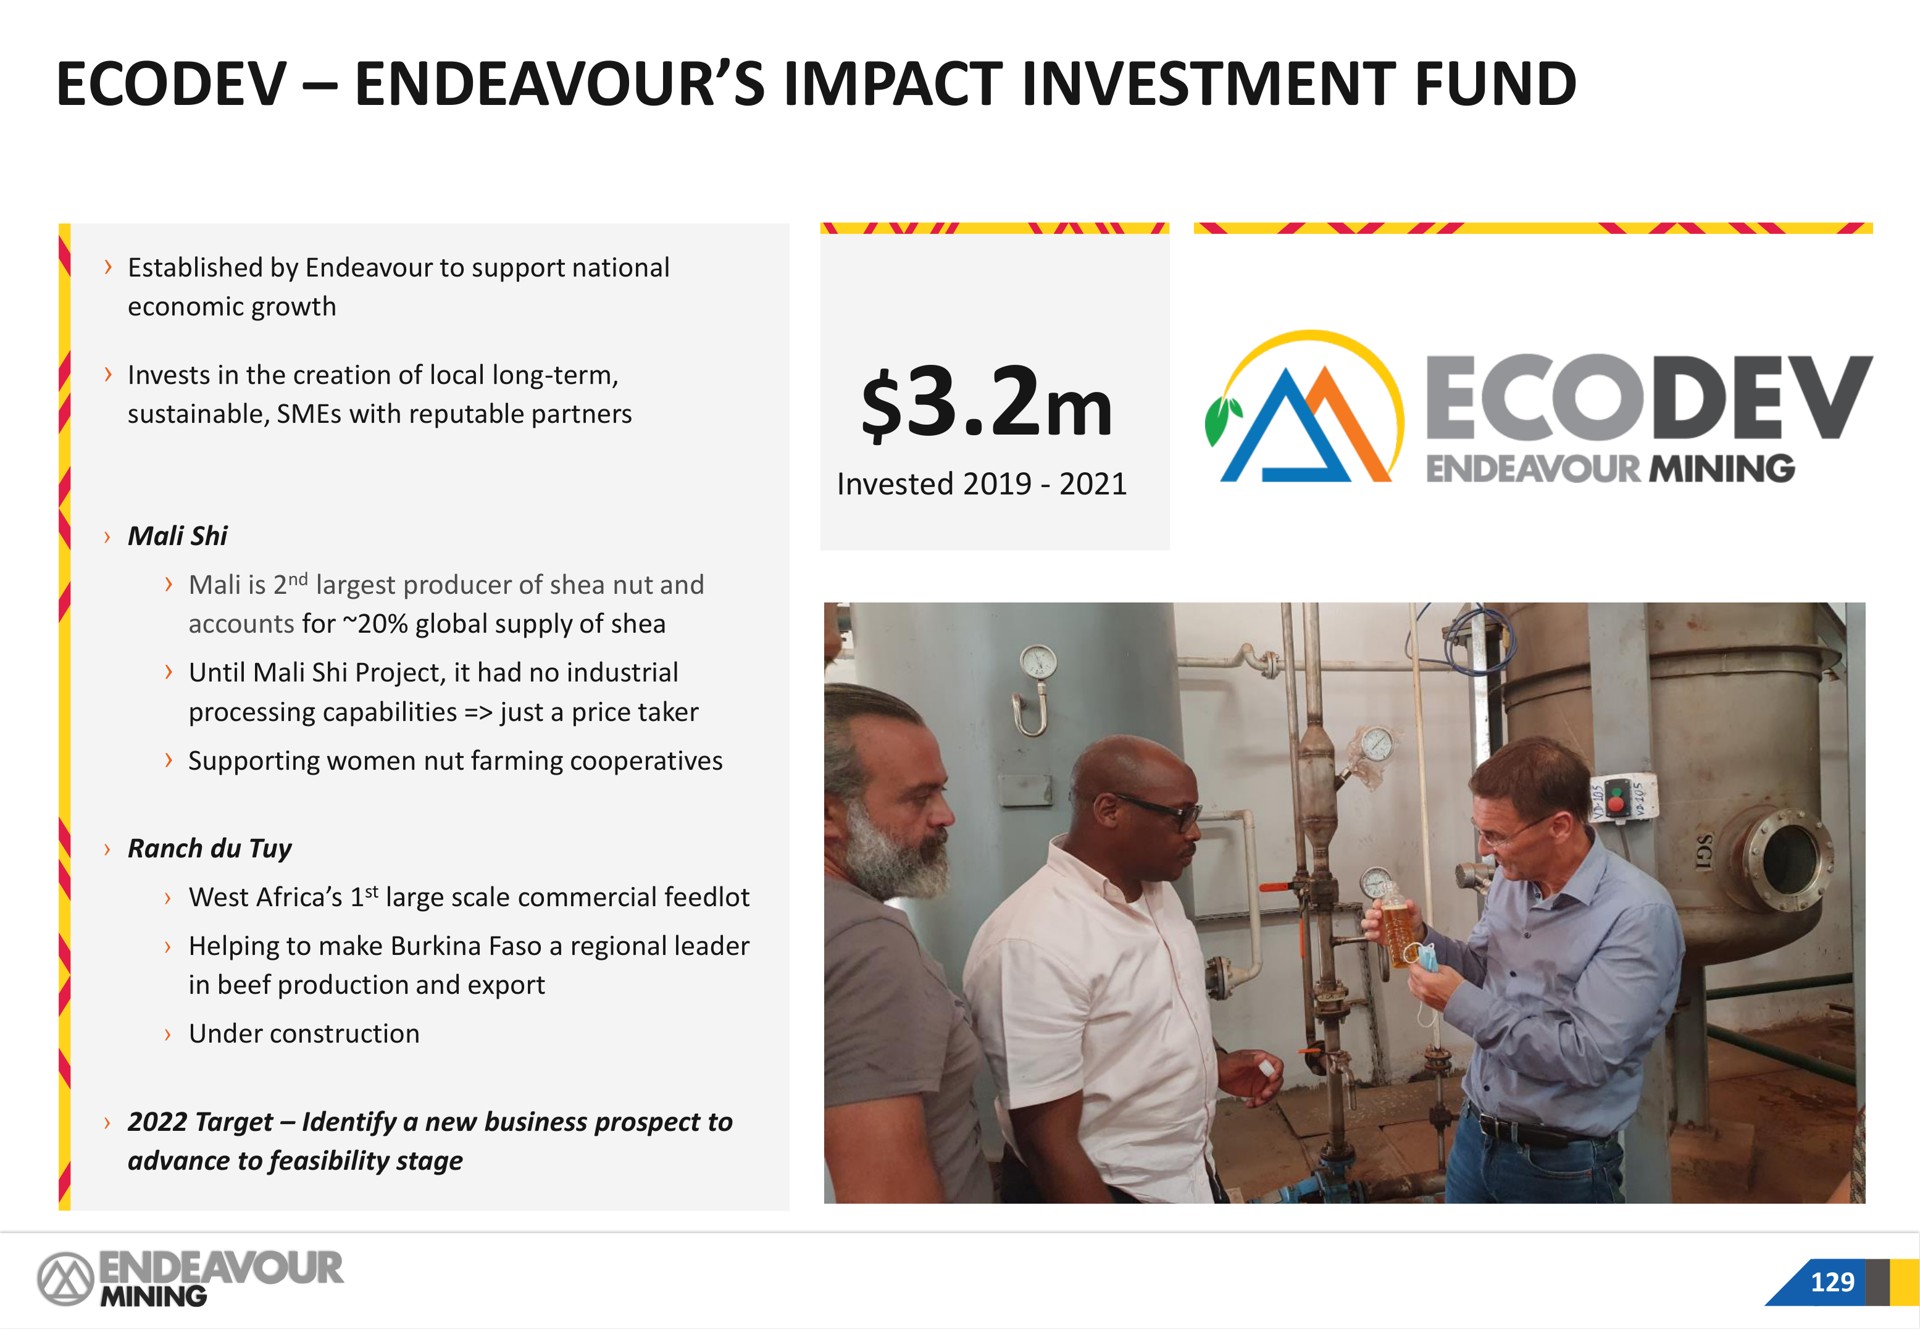 impact investment fund a mining | Endeavour Mining